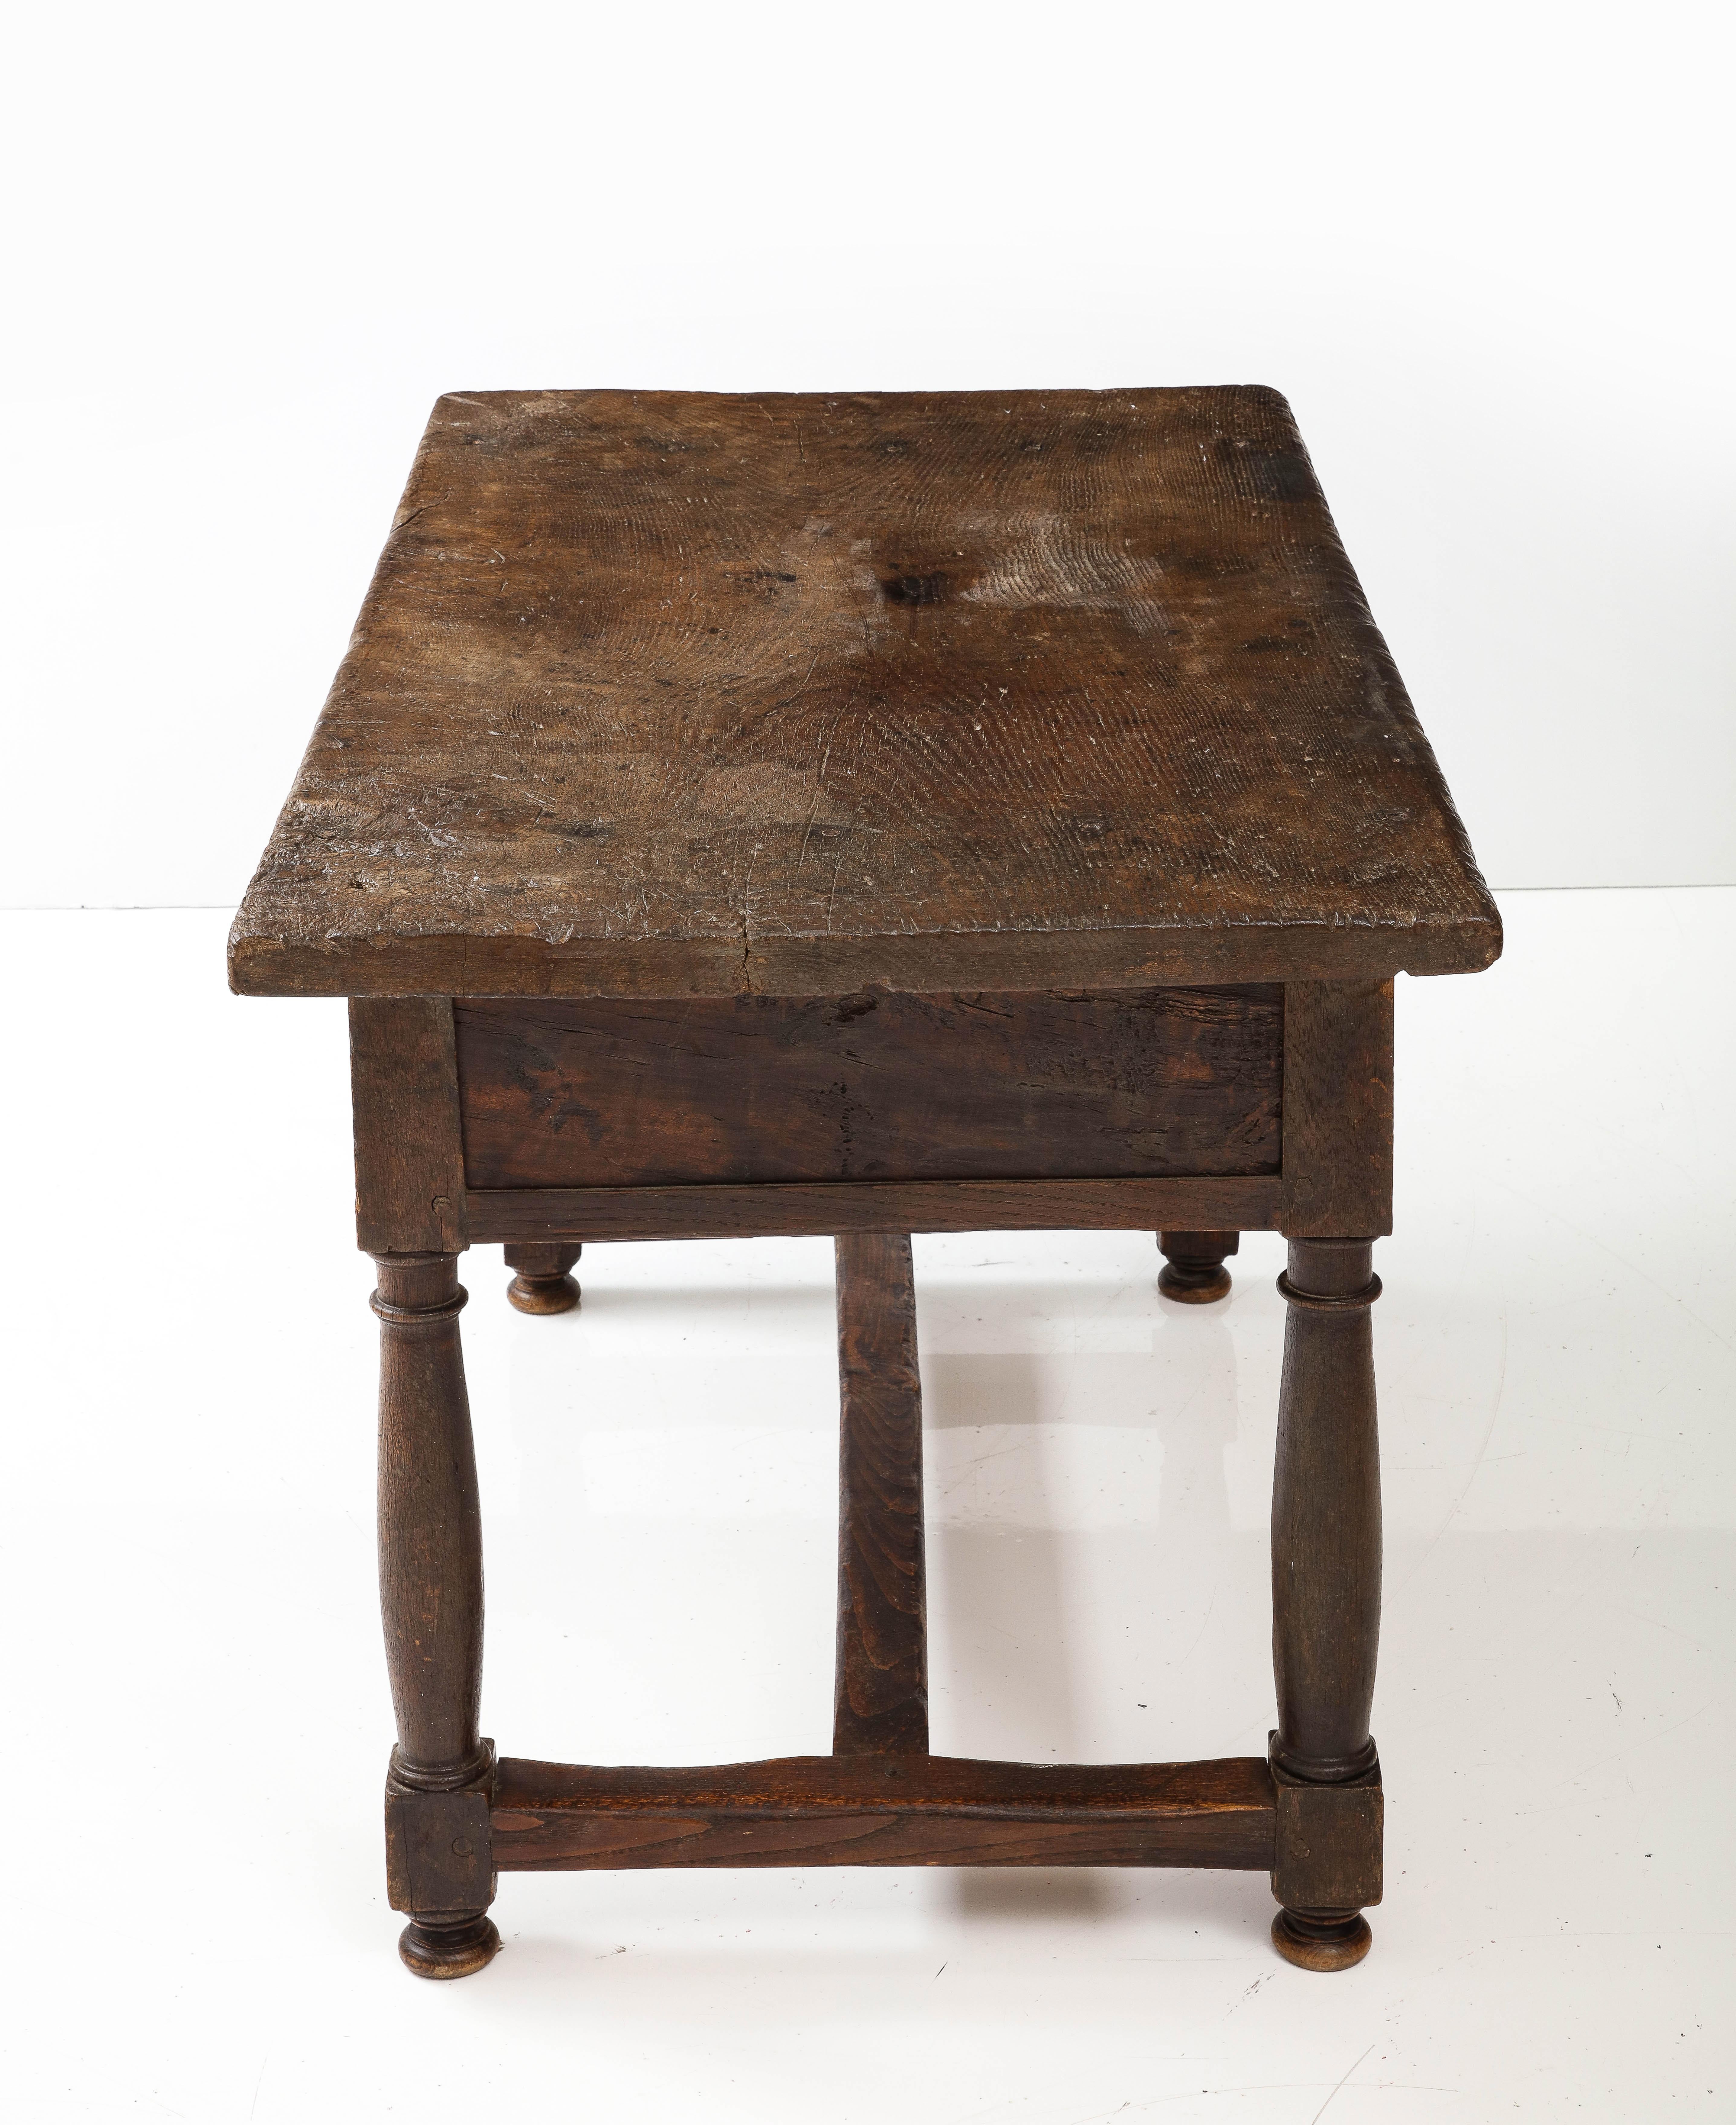 Late 16th C. Spanish Walnut Table with Iron Pulls & Drawers For Sale 12